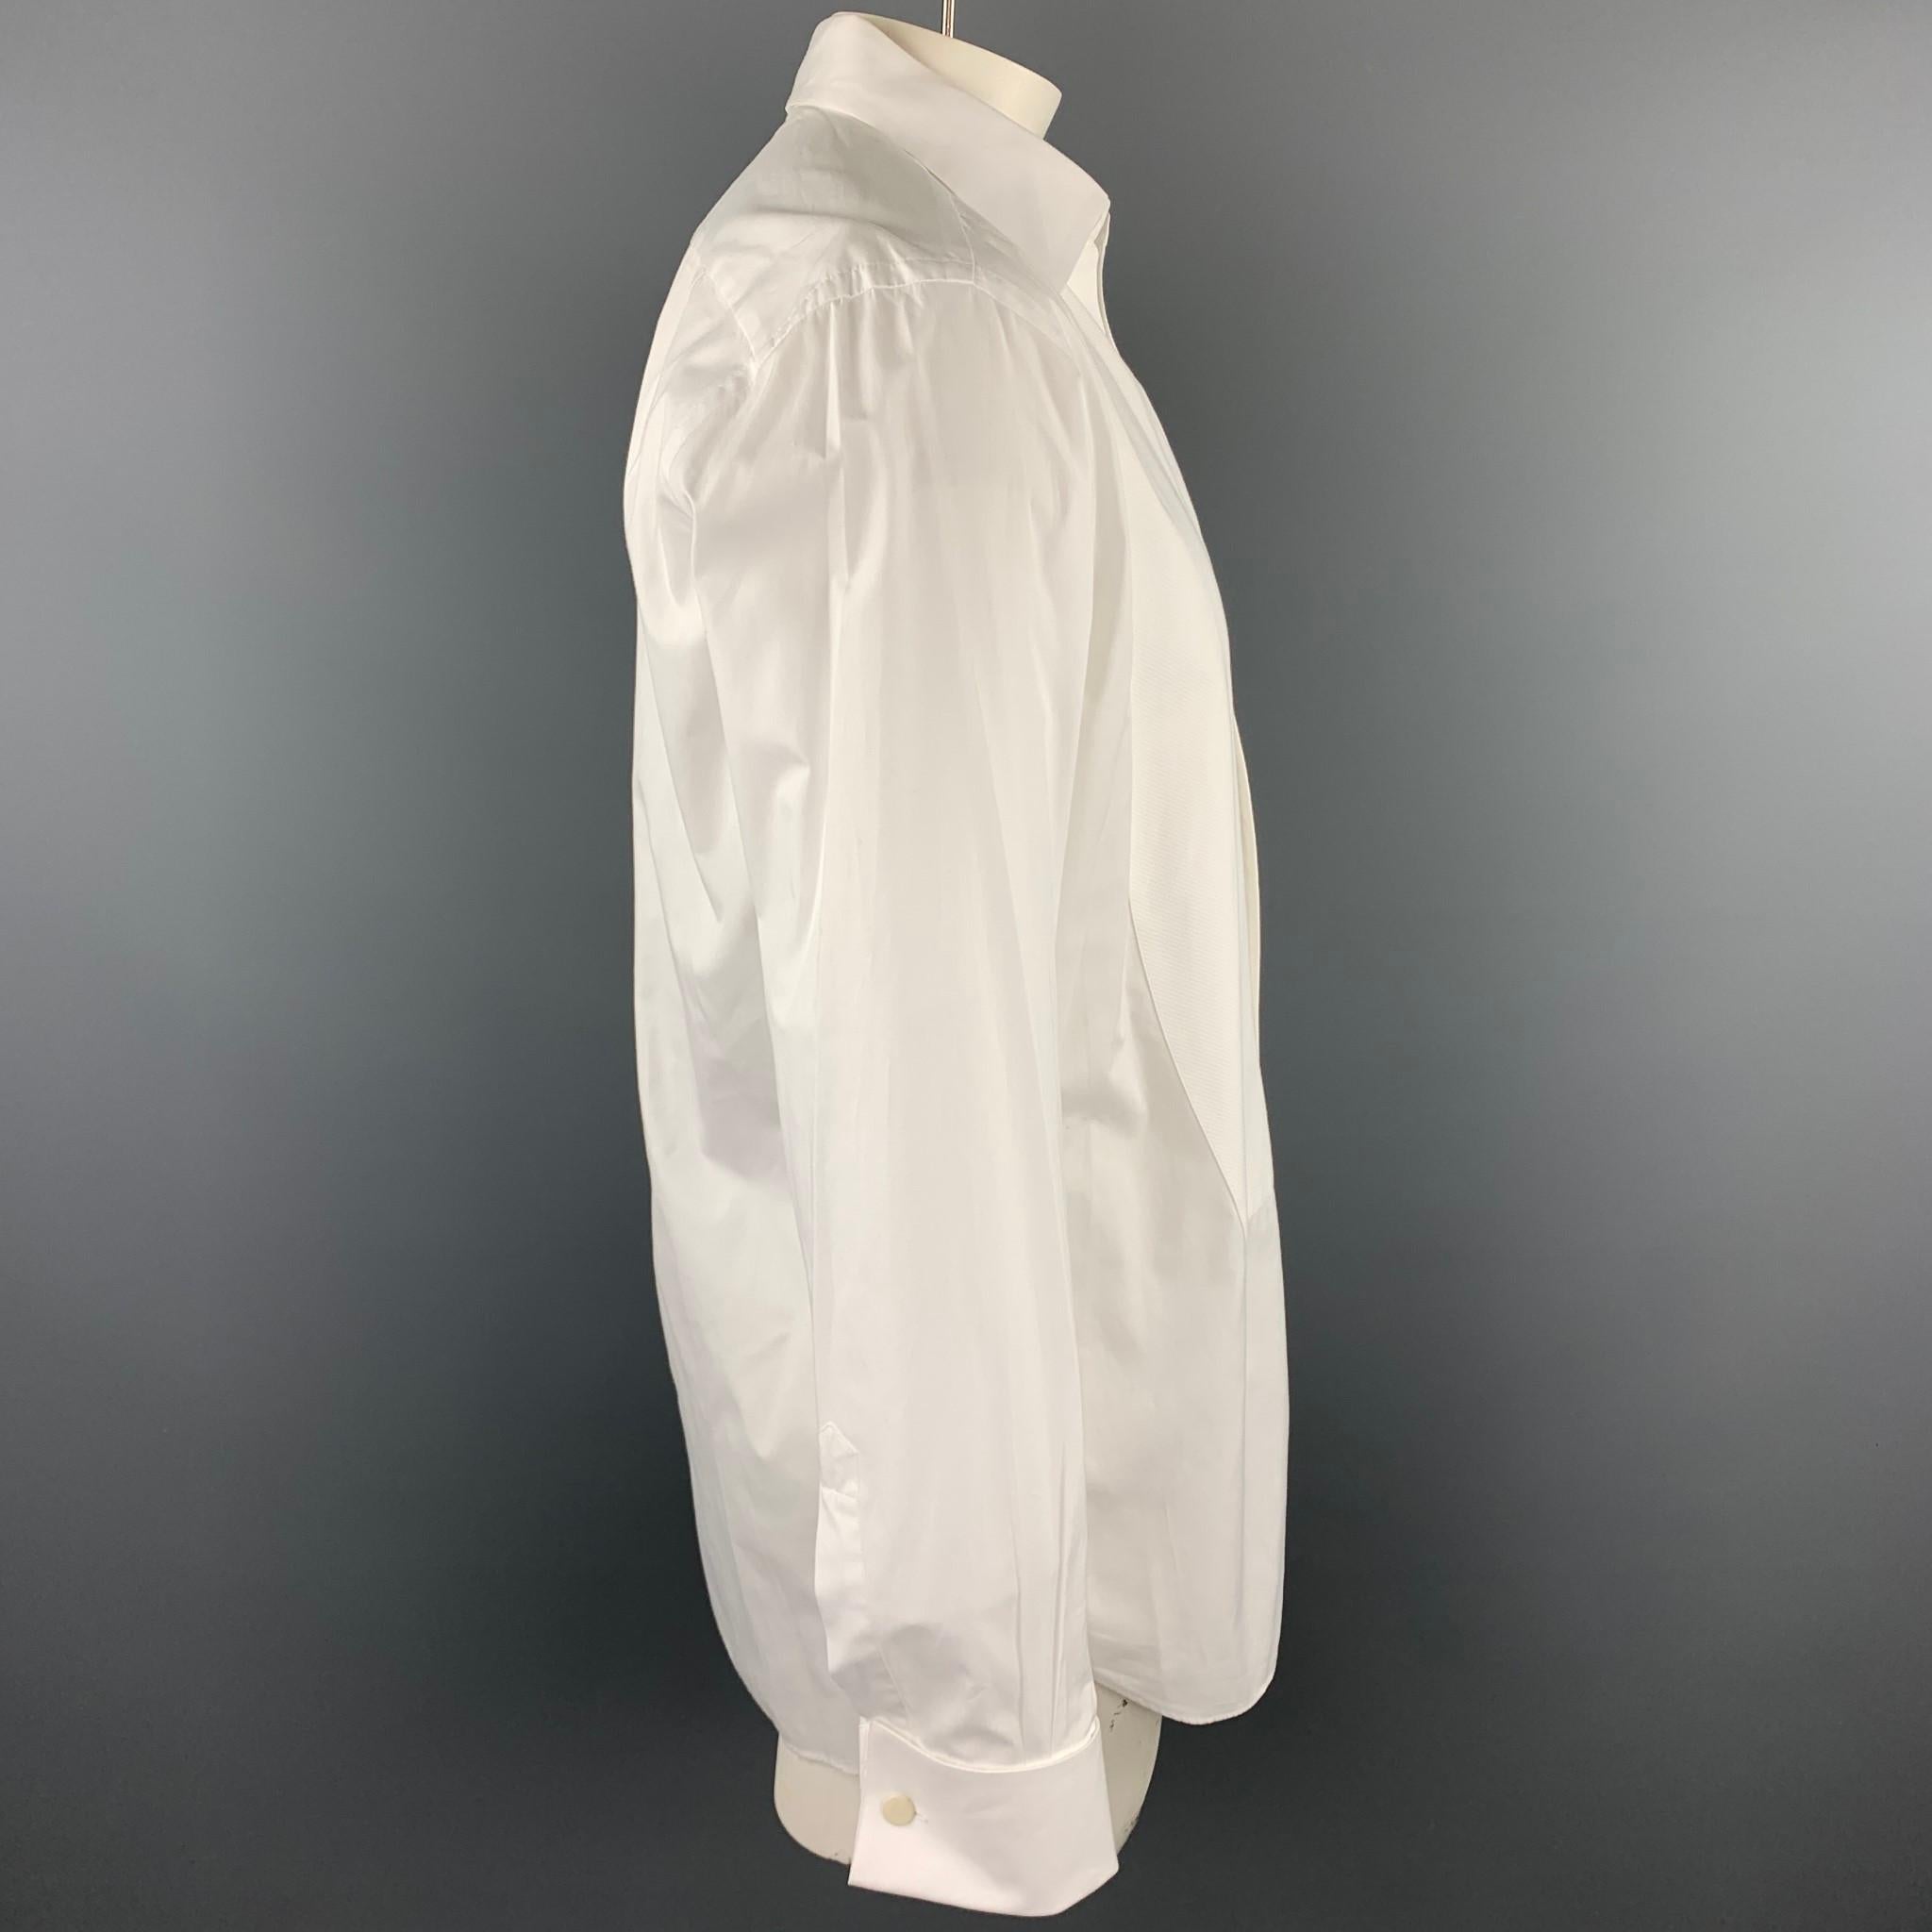 ERMENEGILDO ZEGNA long sleeve shirt comes in a white cotton featuring a tuxedo style and french cuffs. No buttons or cufflinks included. 

Good Pre-Owned Condition.
Marked: 42/16.5

Measurements:

Shoulder: 18.5 in. 
Chest: 42 in. 
Sleeve: 26.5 in.